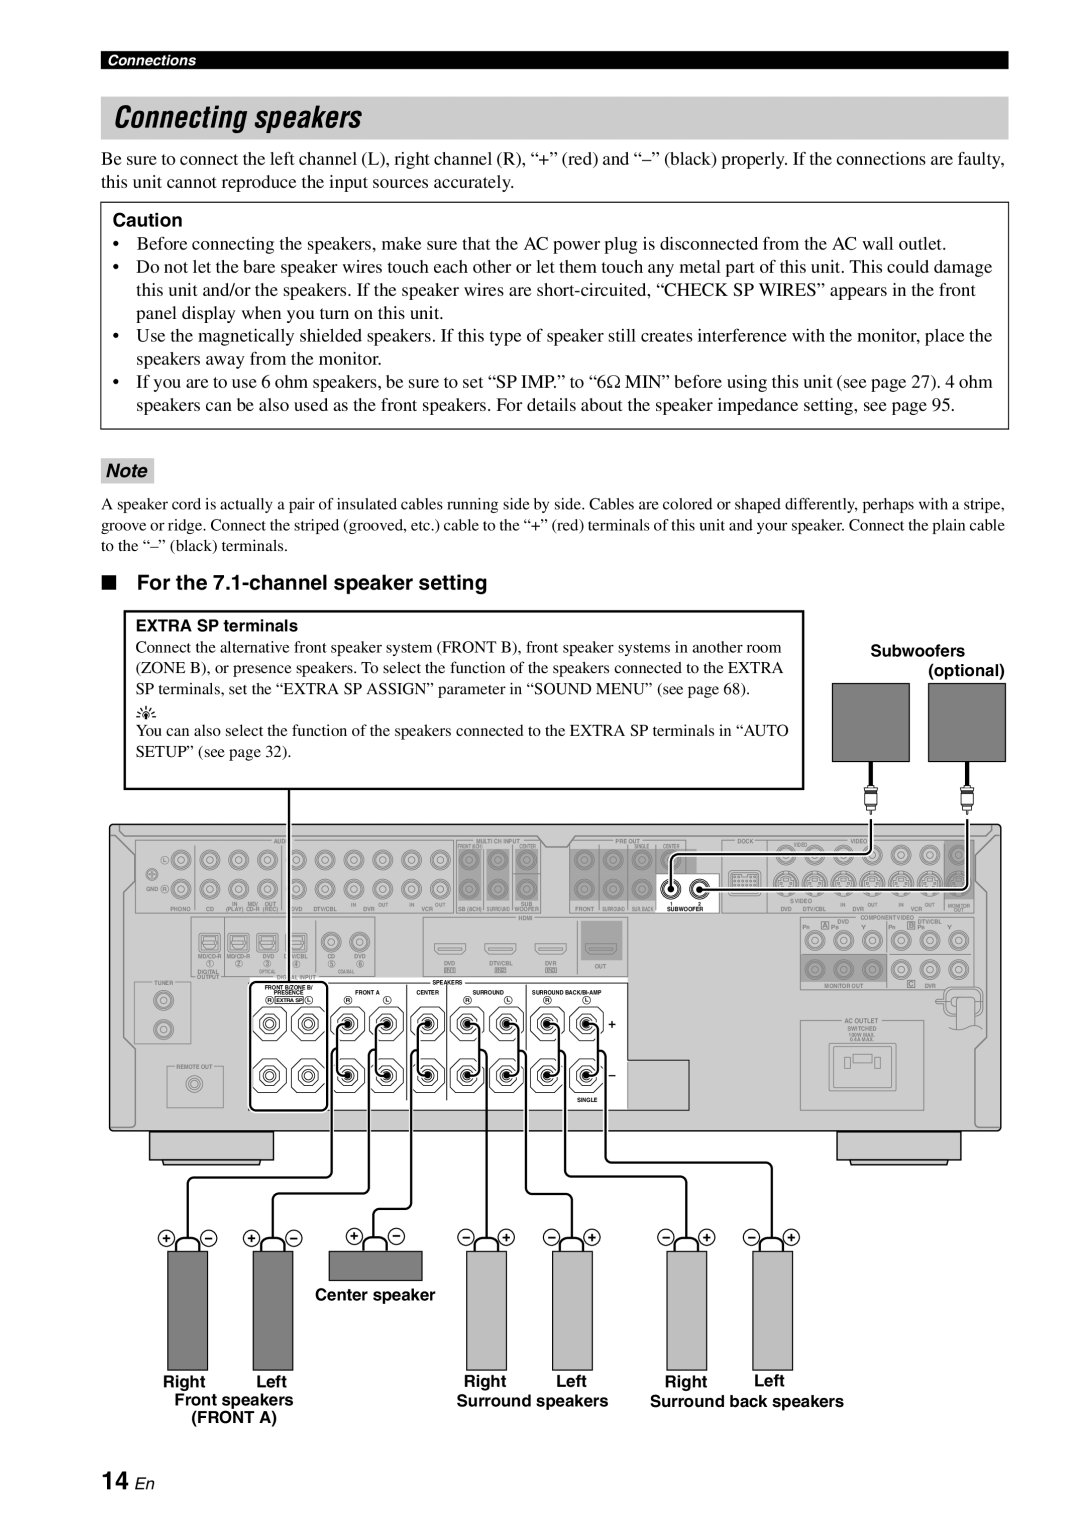 Yamaha DSP-AX863SE owner manual Connecting speakers, 14 En, For the 7.1-channelspeaker setting 